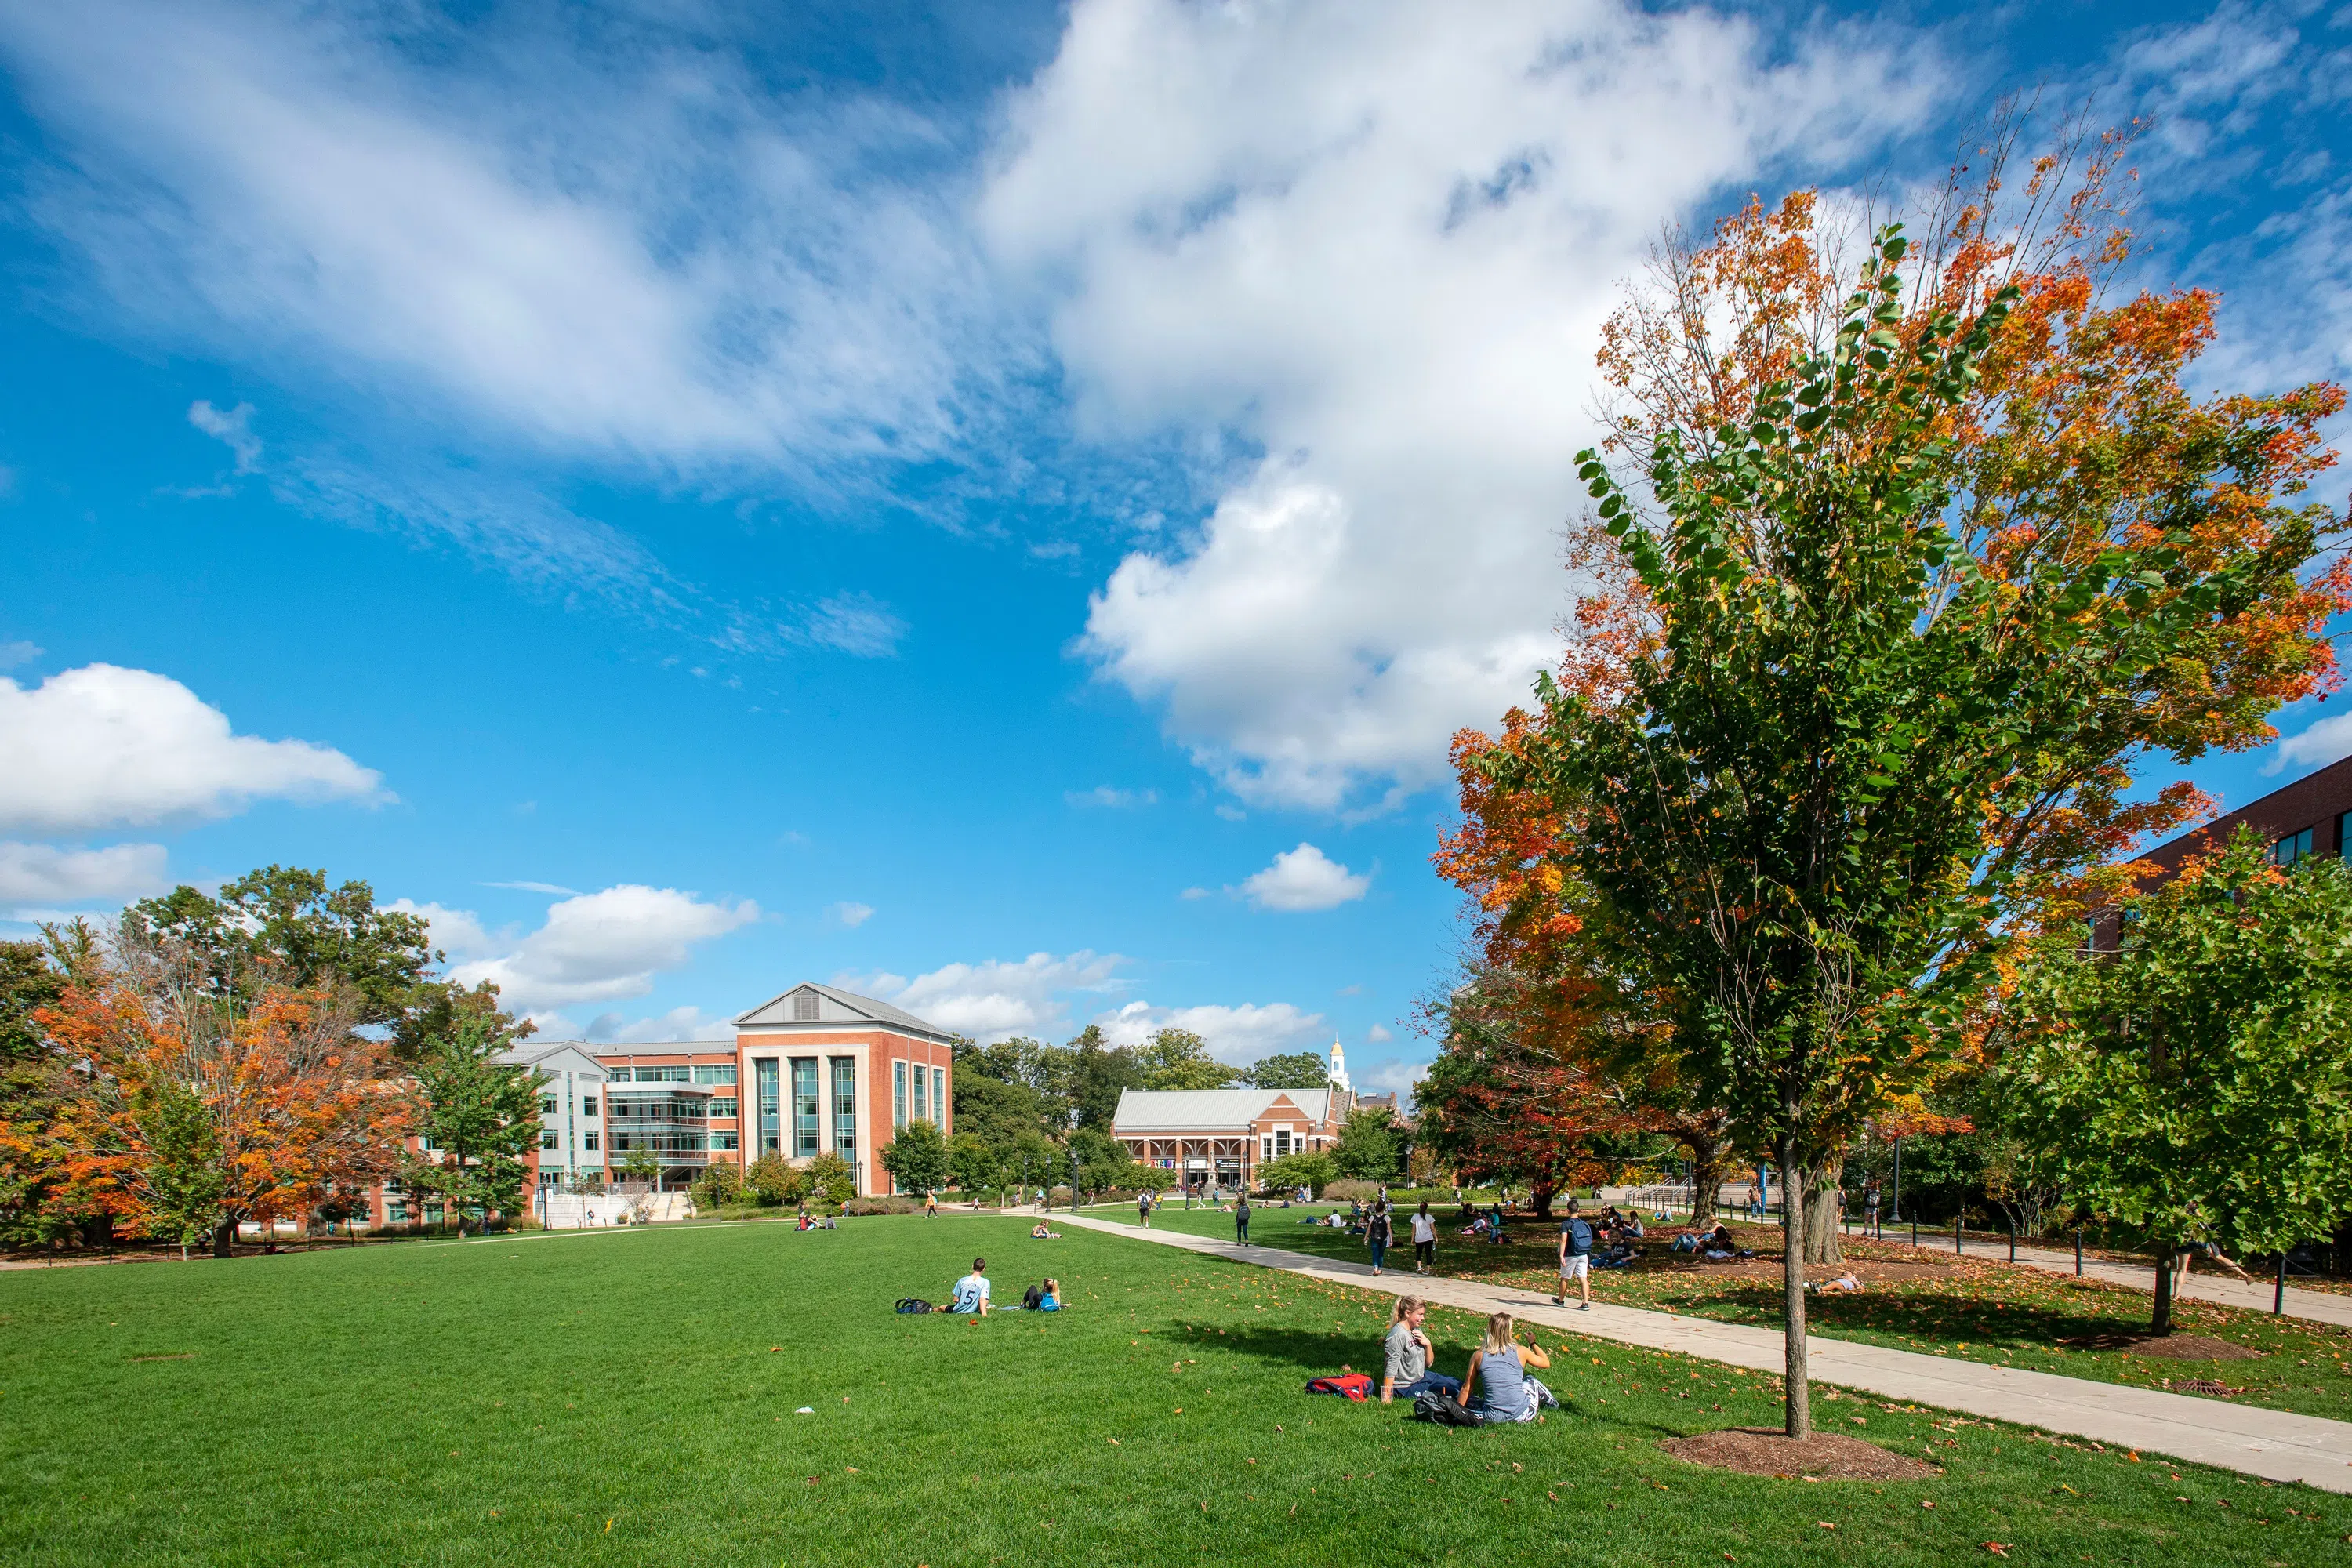 Students sitting on the grass on the student union quad